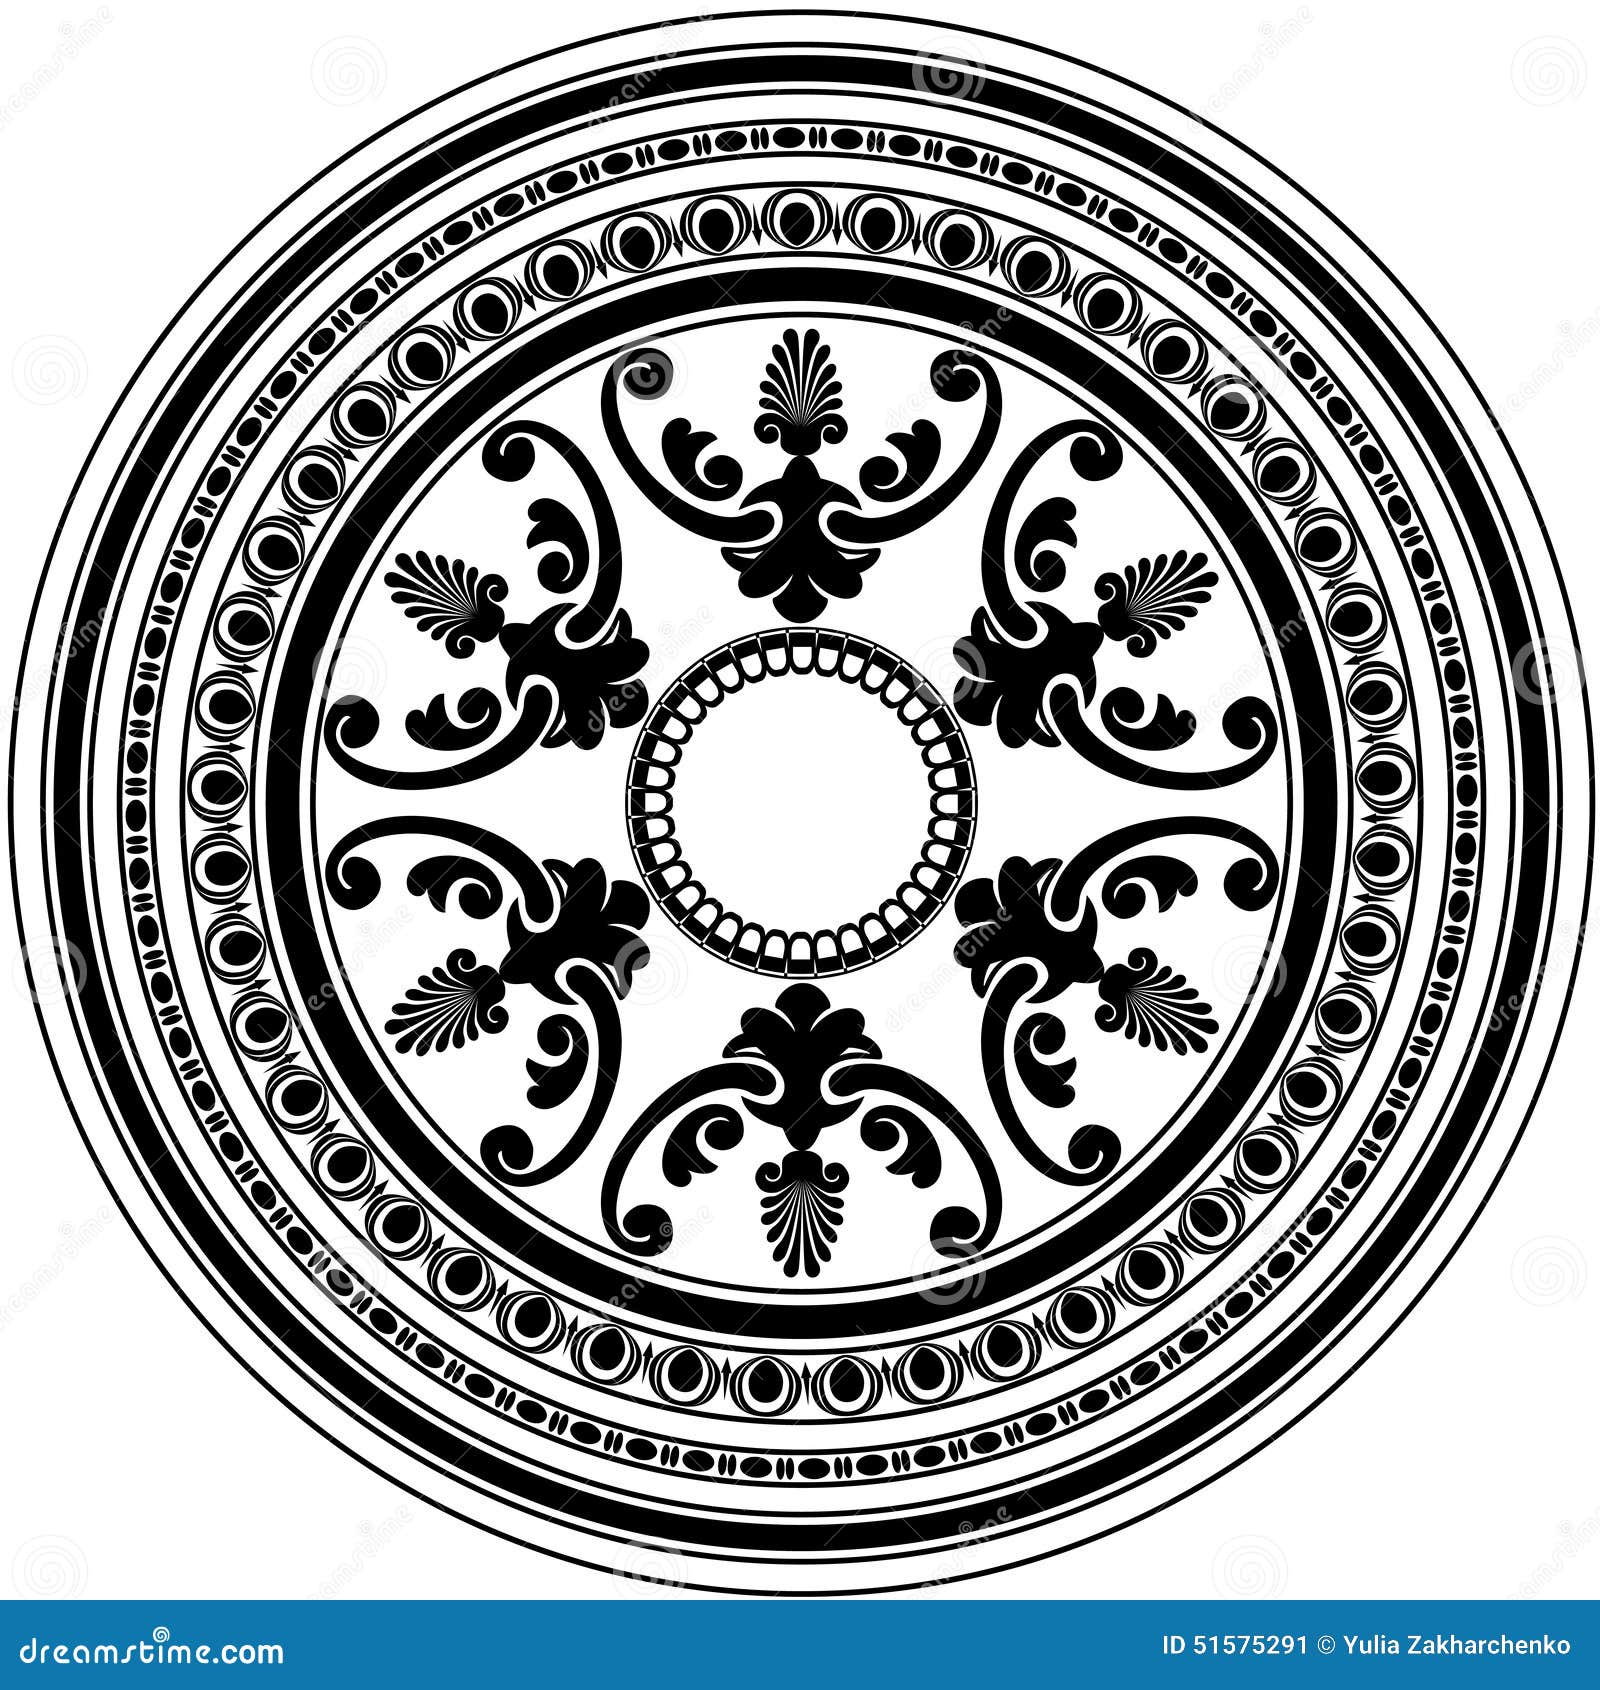 Download Round Decorative Black Ornament Isolated On White Stock ...